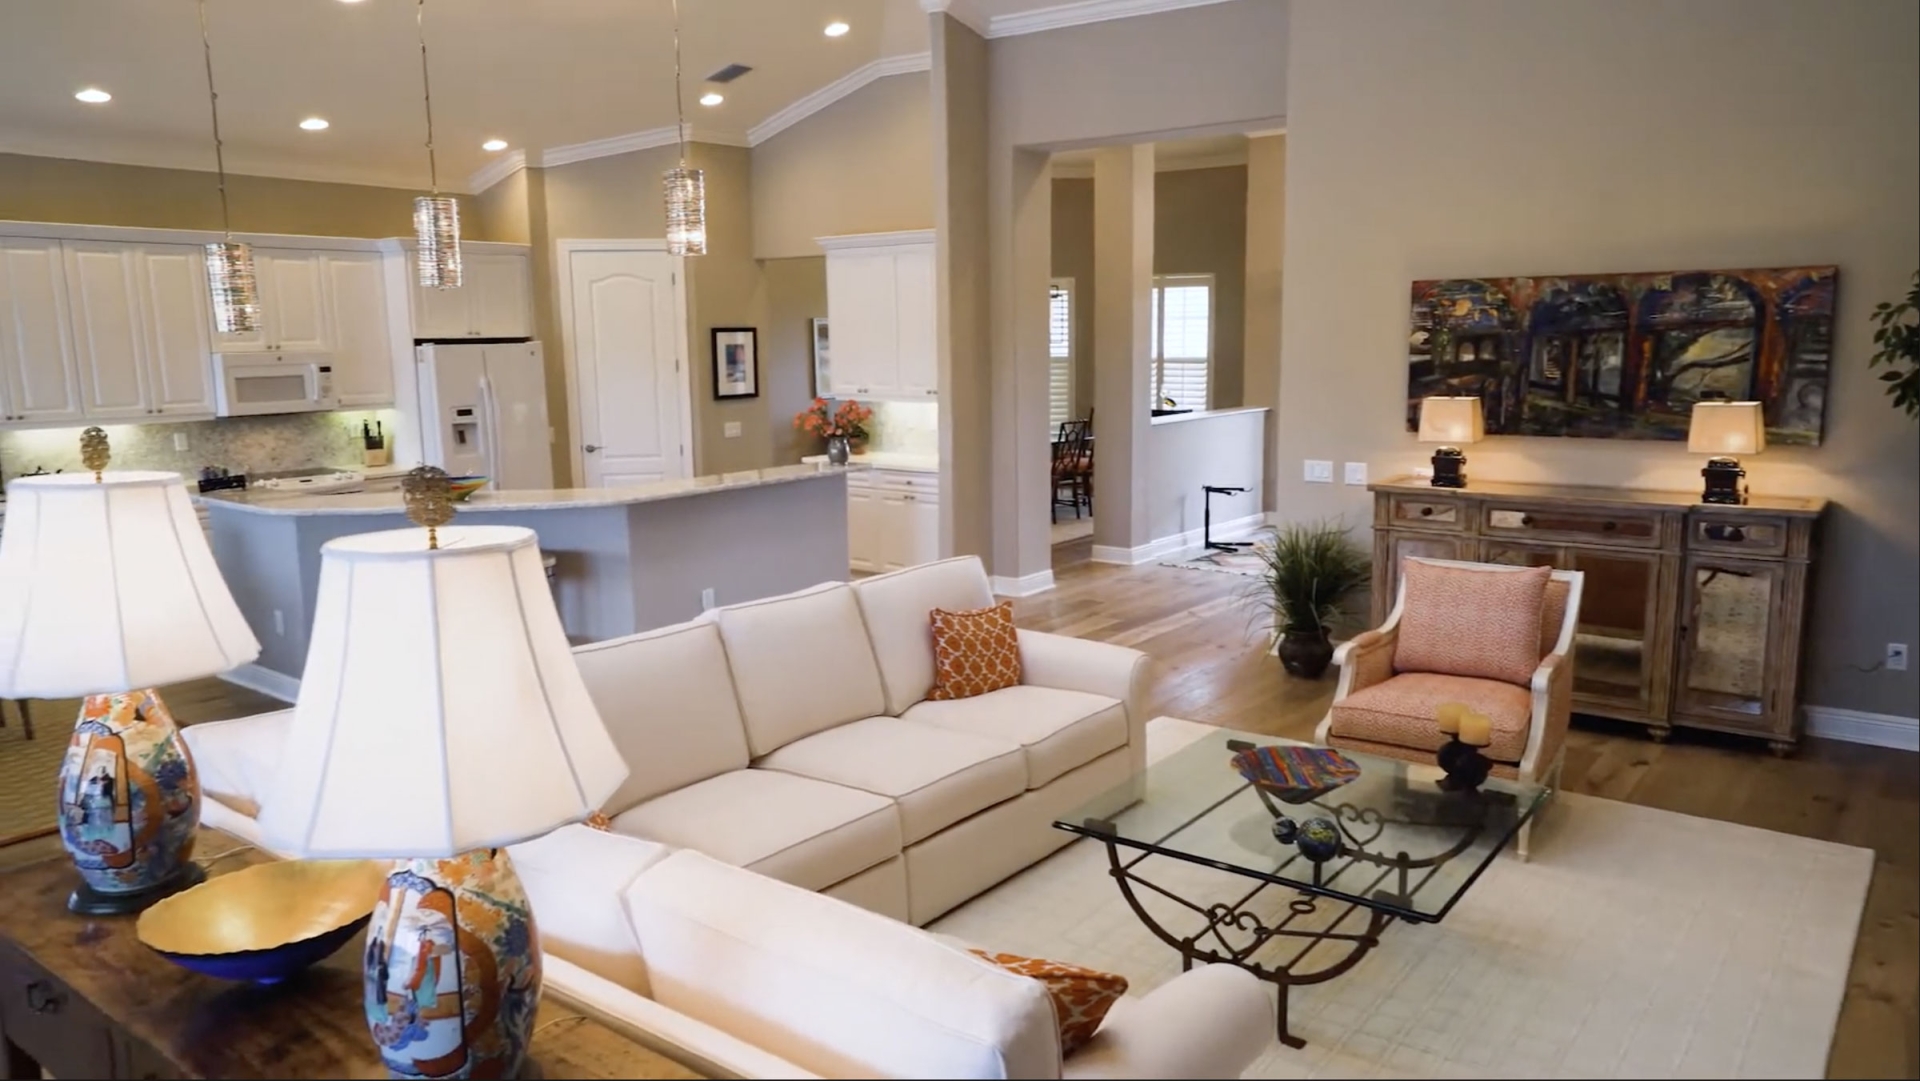 The Living Room in the Boca Grande model home at Shell Point Retirement Community